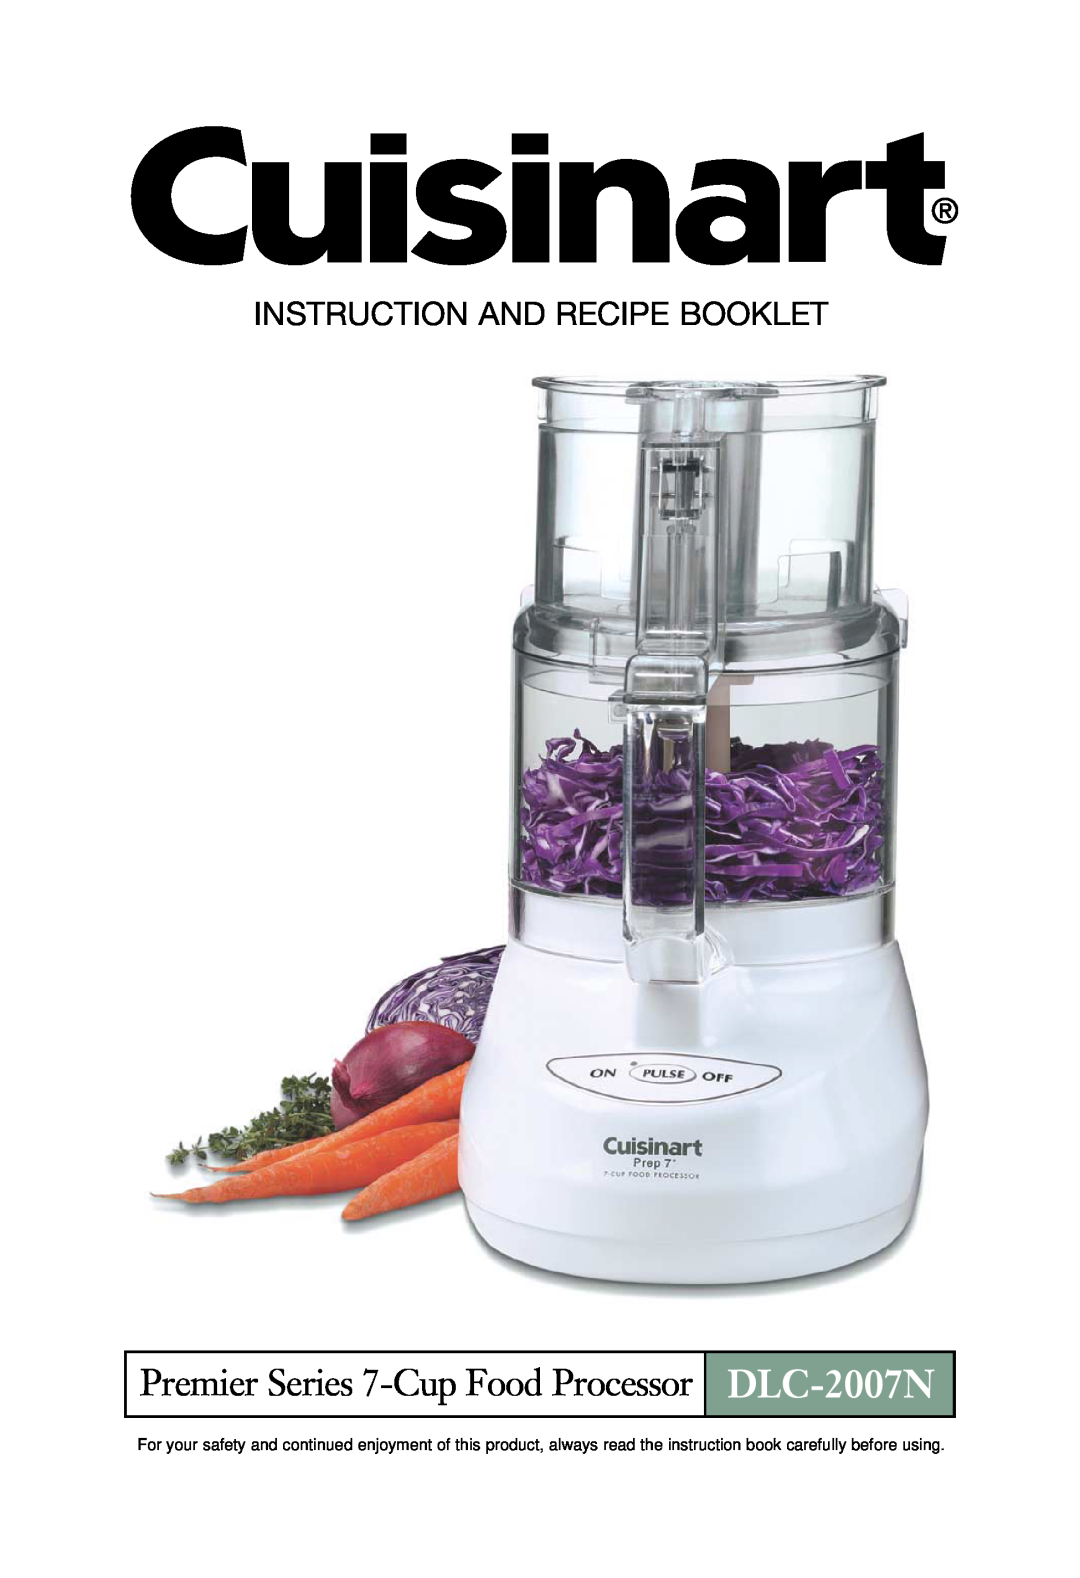 Cuisinart DLC-2007N manual Premier Series 7-Cup Food Processor, Instruction And Recipe Booklet 